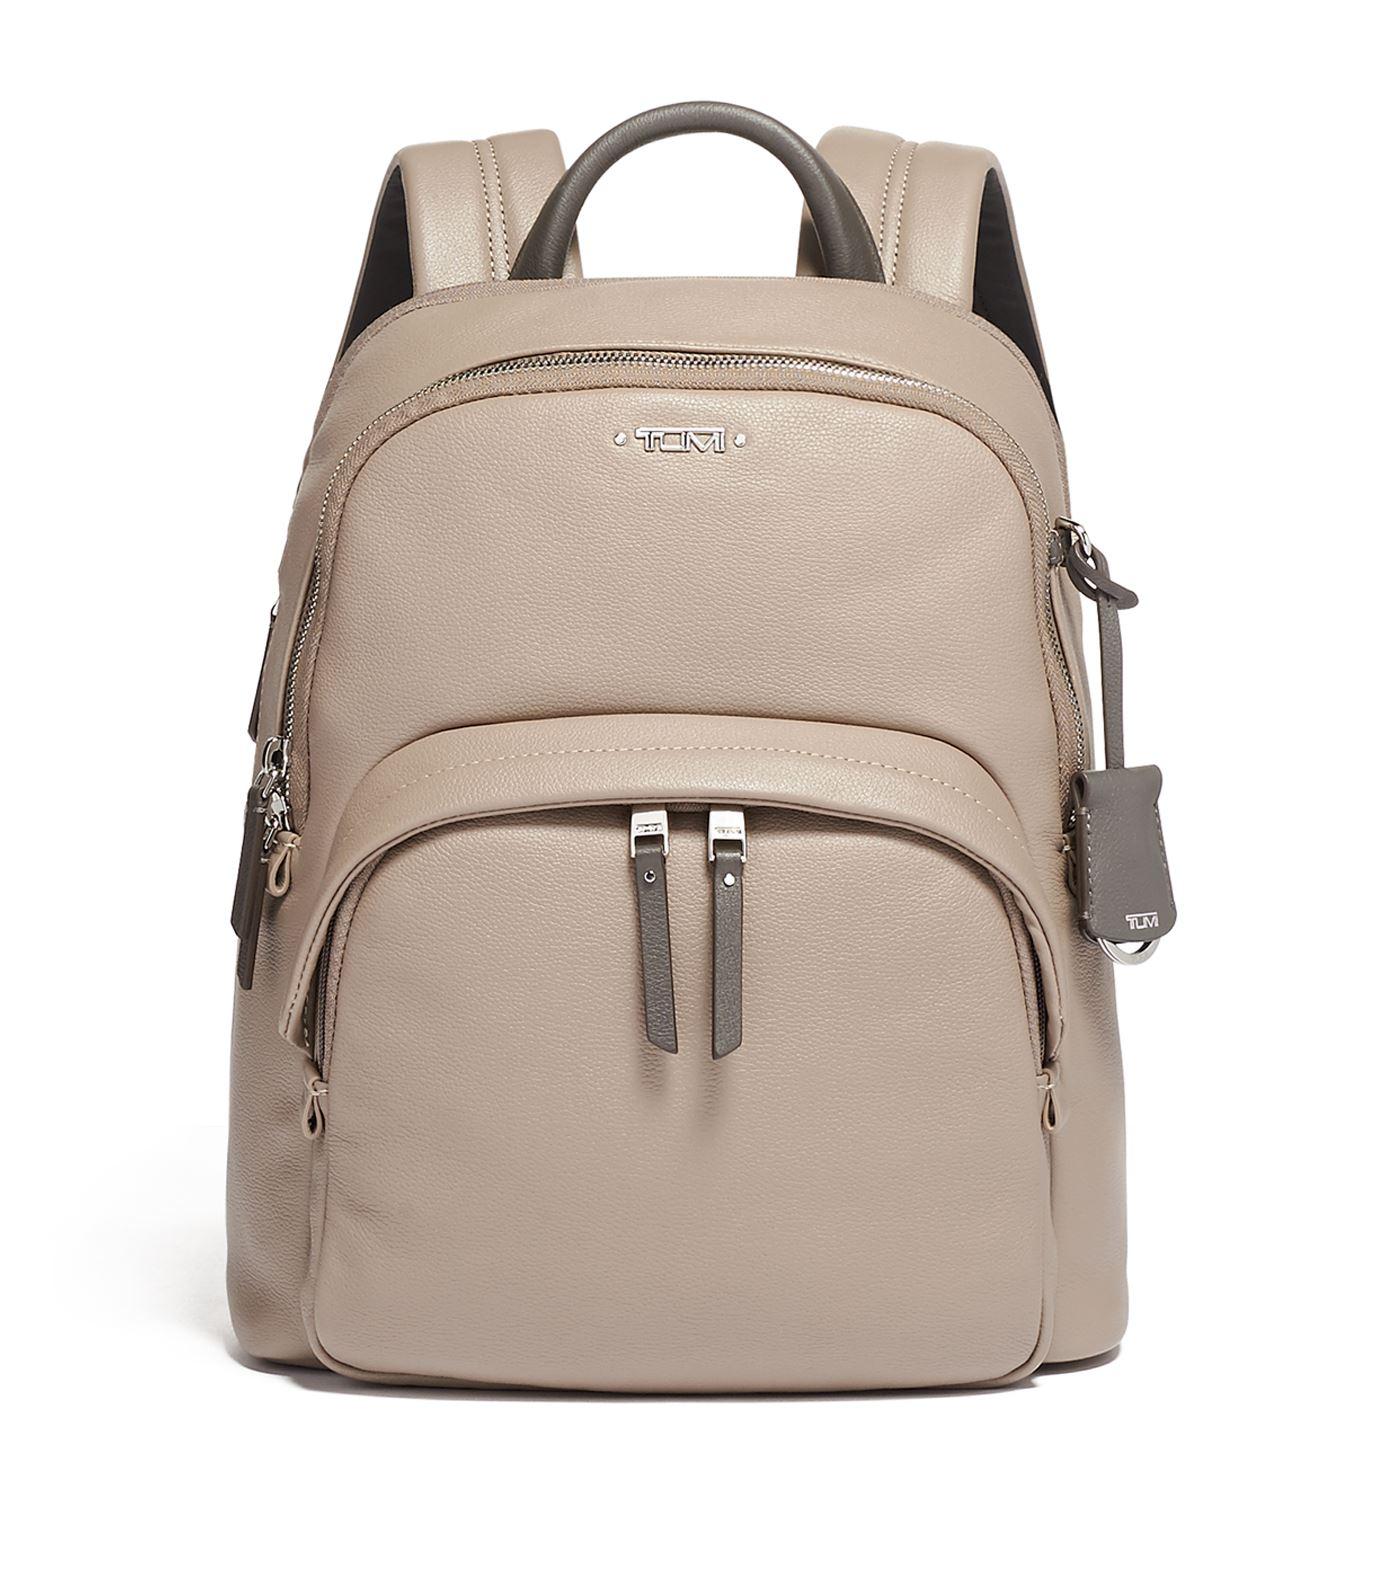 Tumi Dori Leather Backpack in Natural - Lyst